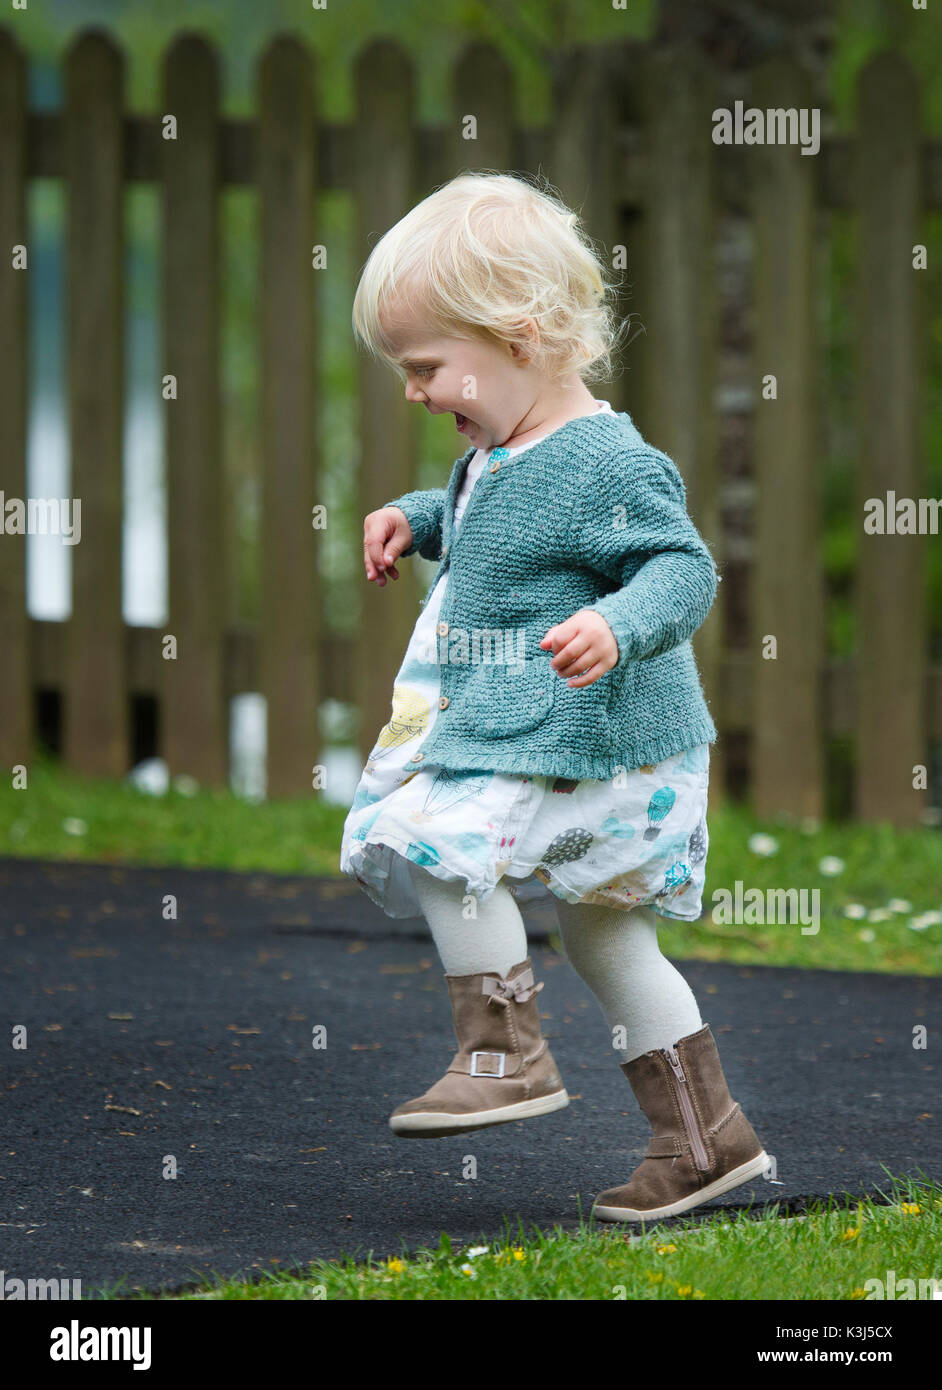 A toddler playing in a park Stock Photo